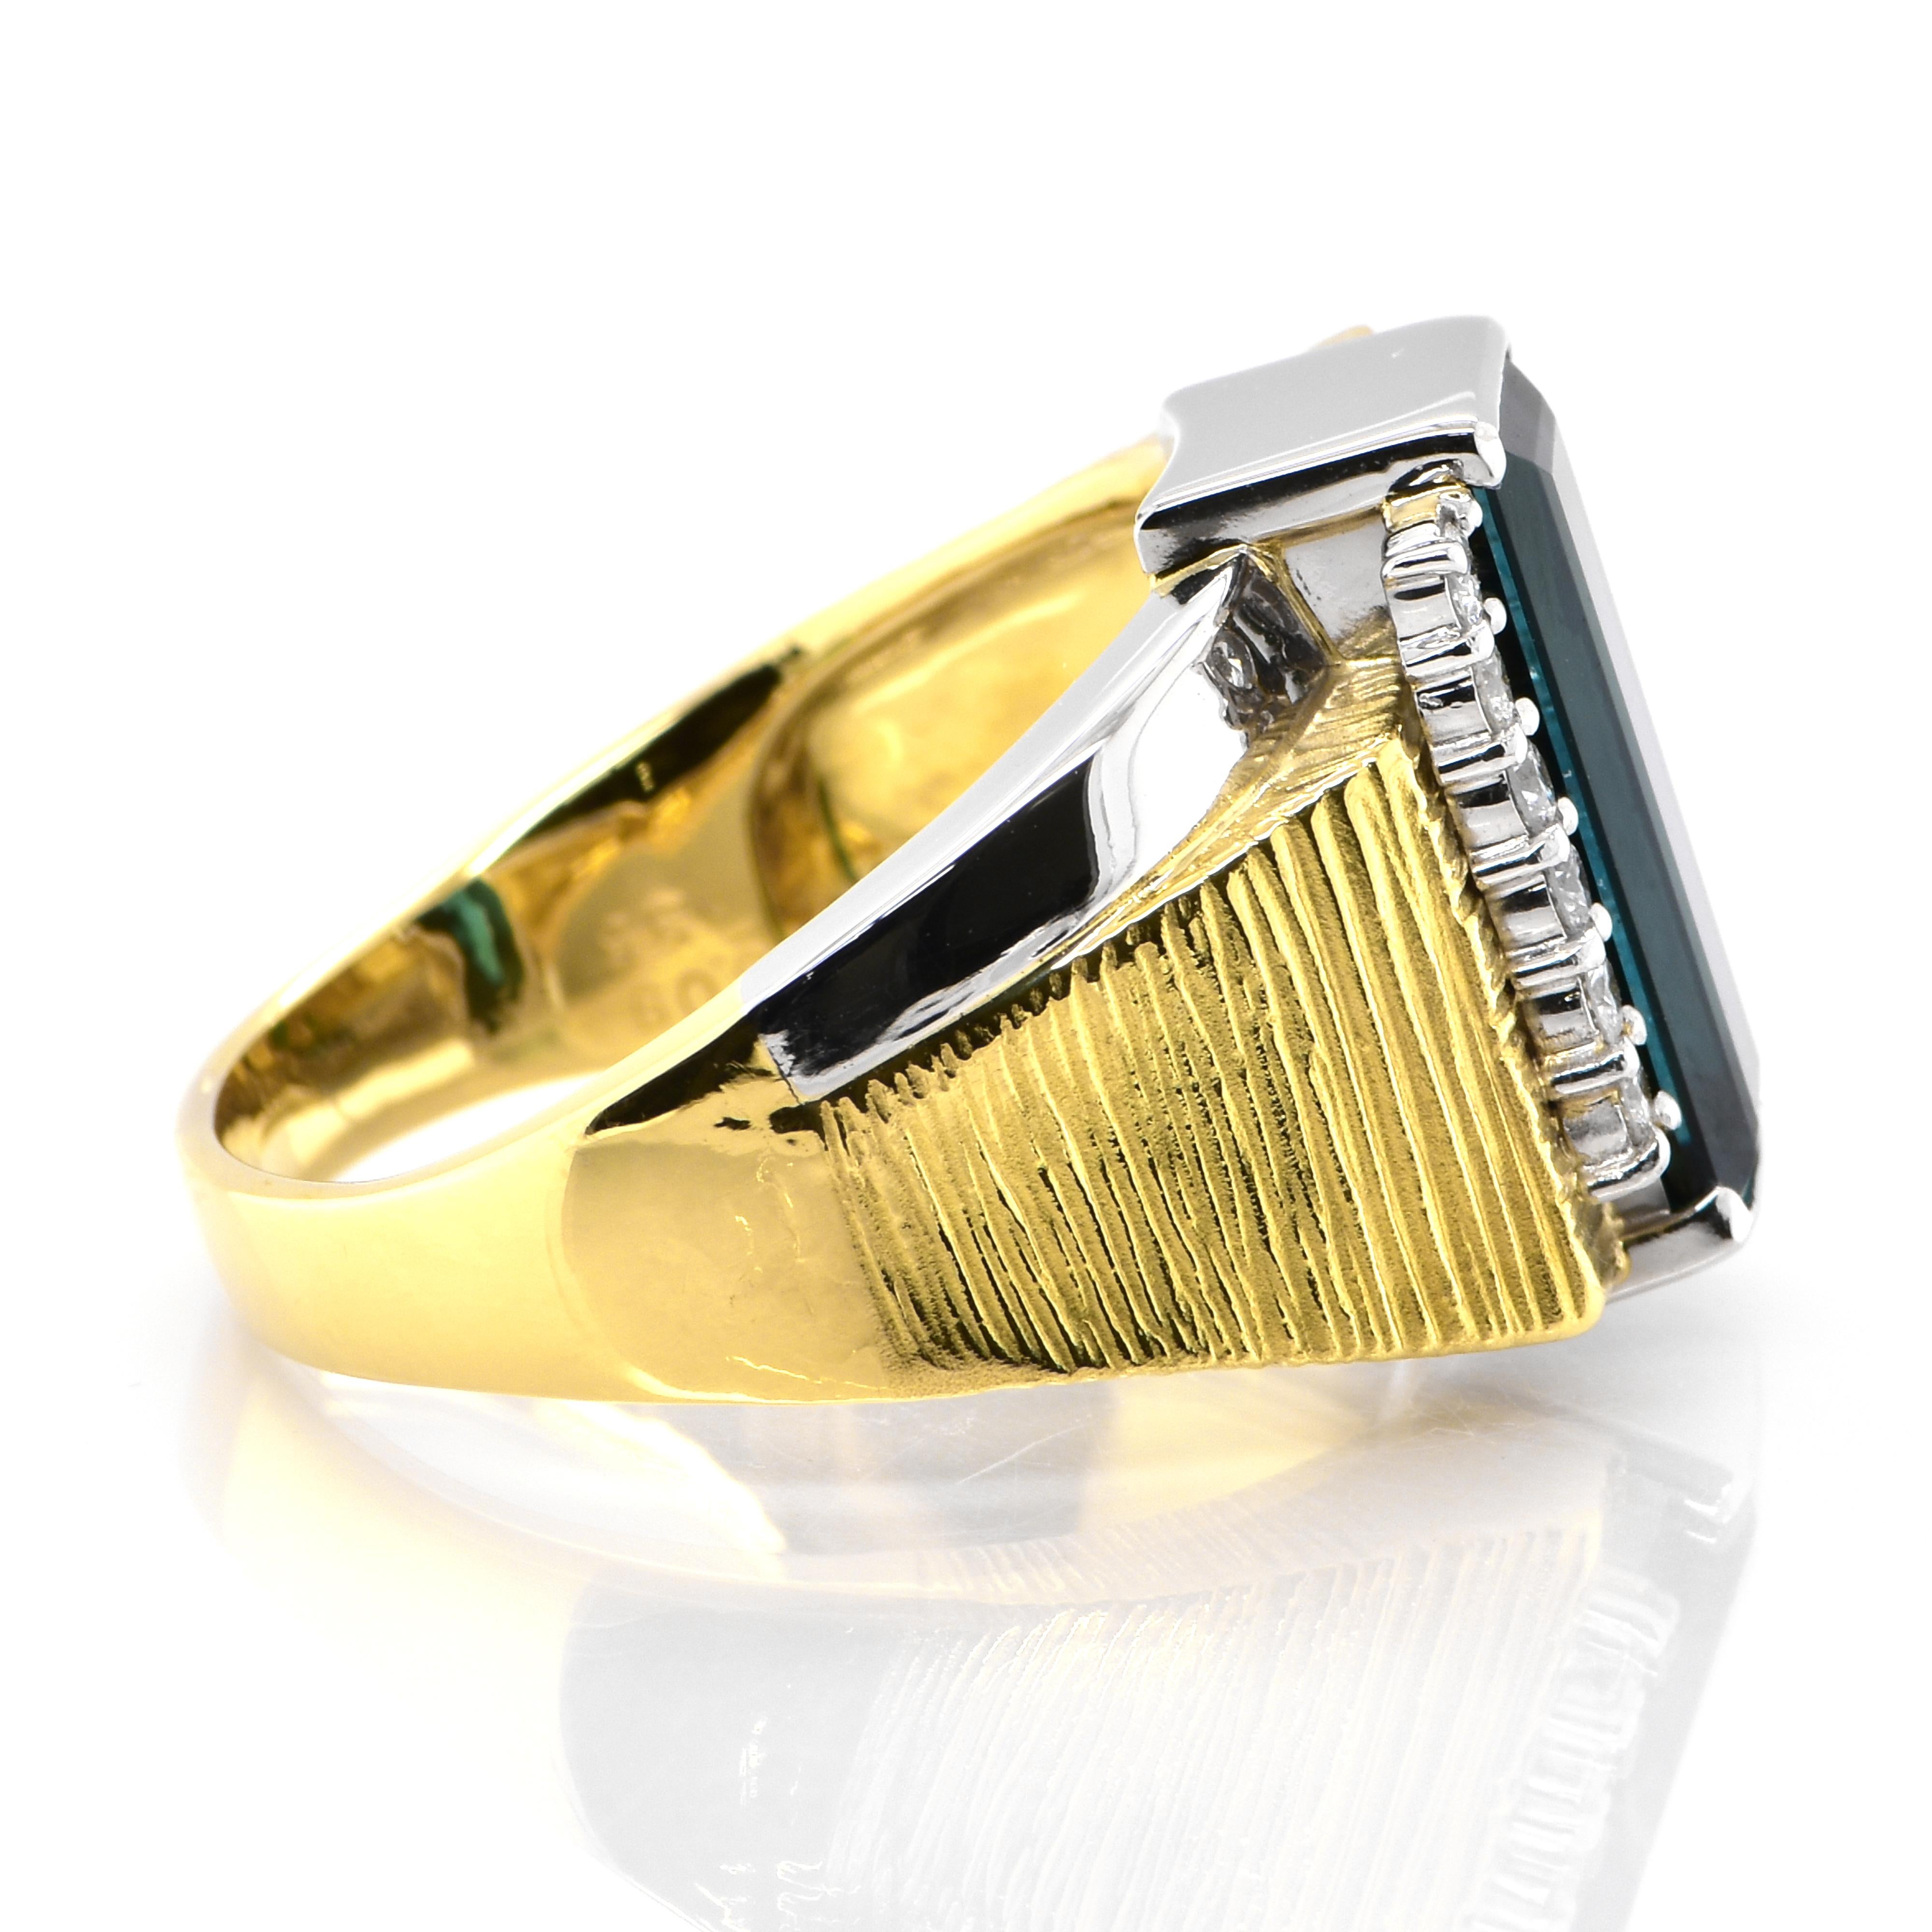 5.09 Carat Indicolite Tourmaline and Diamond Ring set in 18K Gold & Platinum In Excellent Condition For Sale In Tokyo, JP